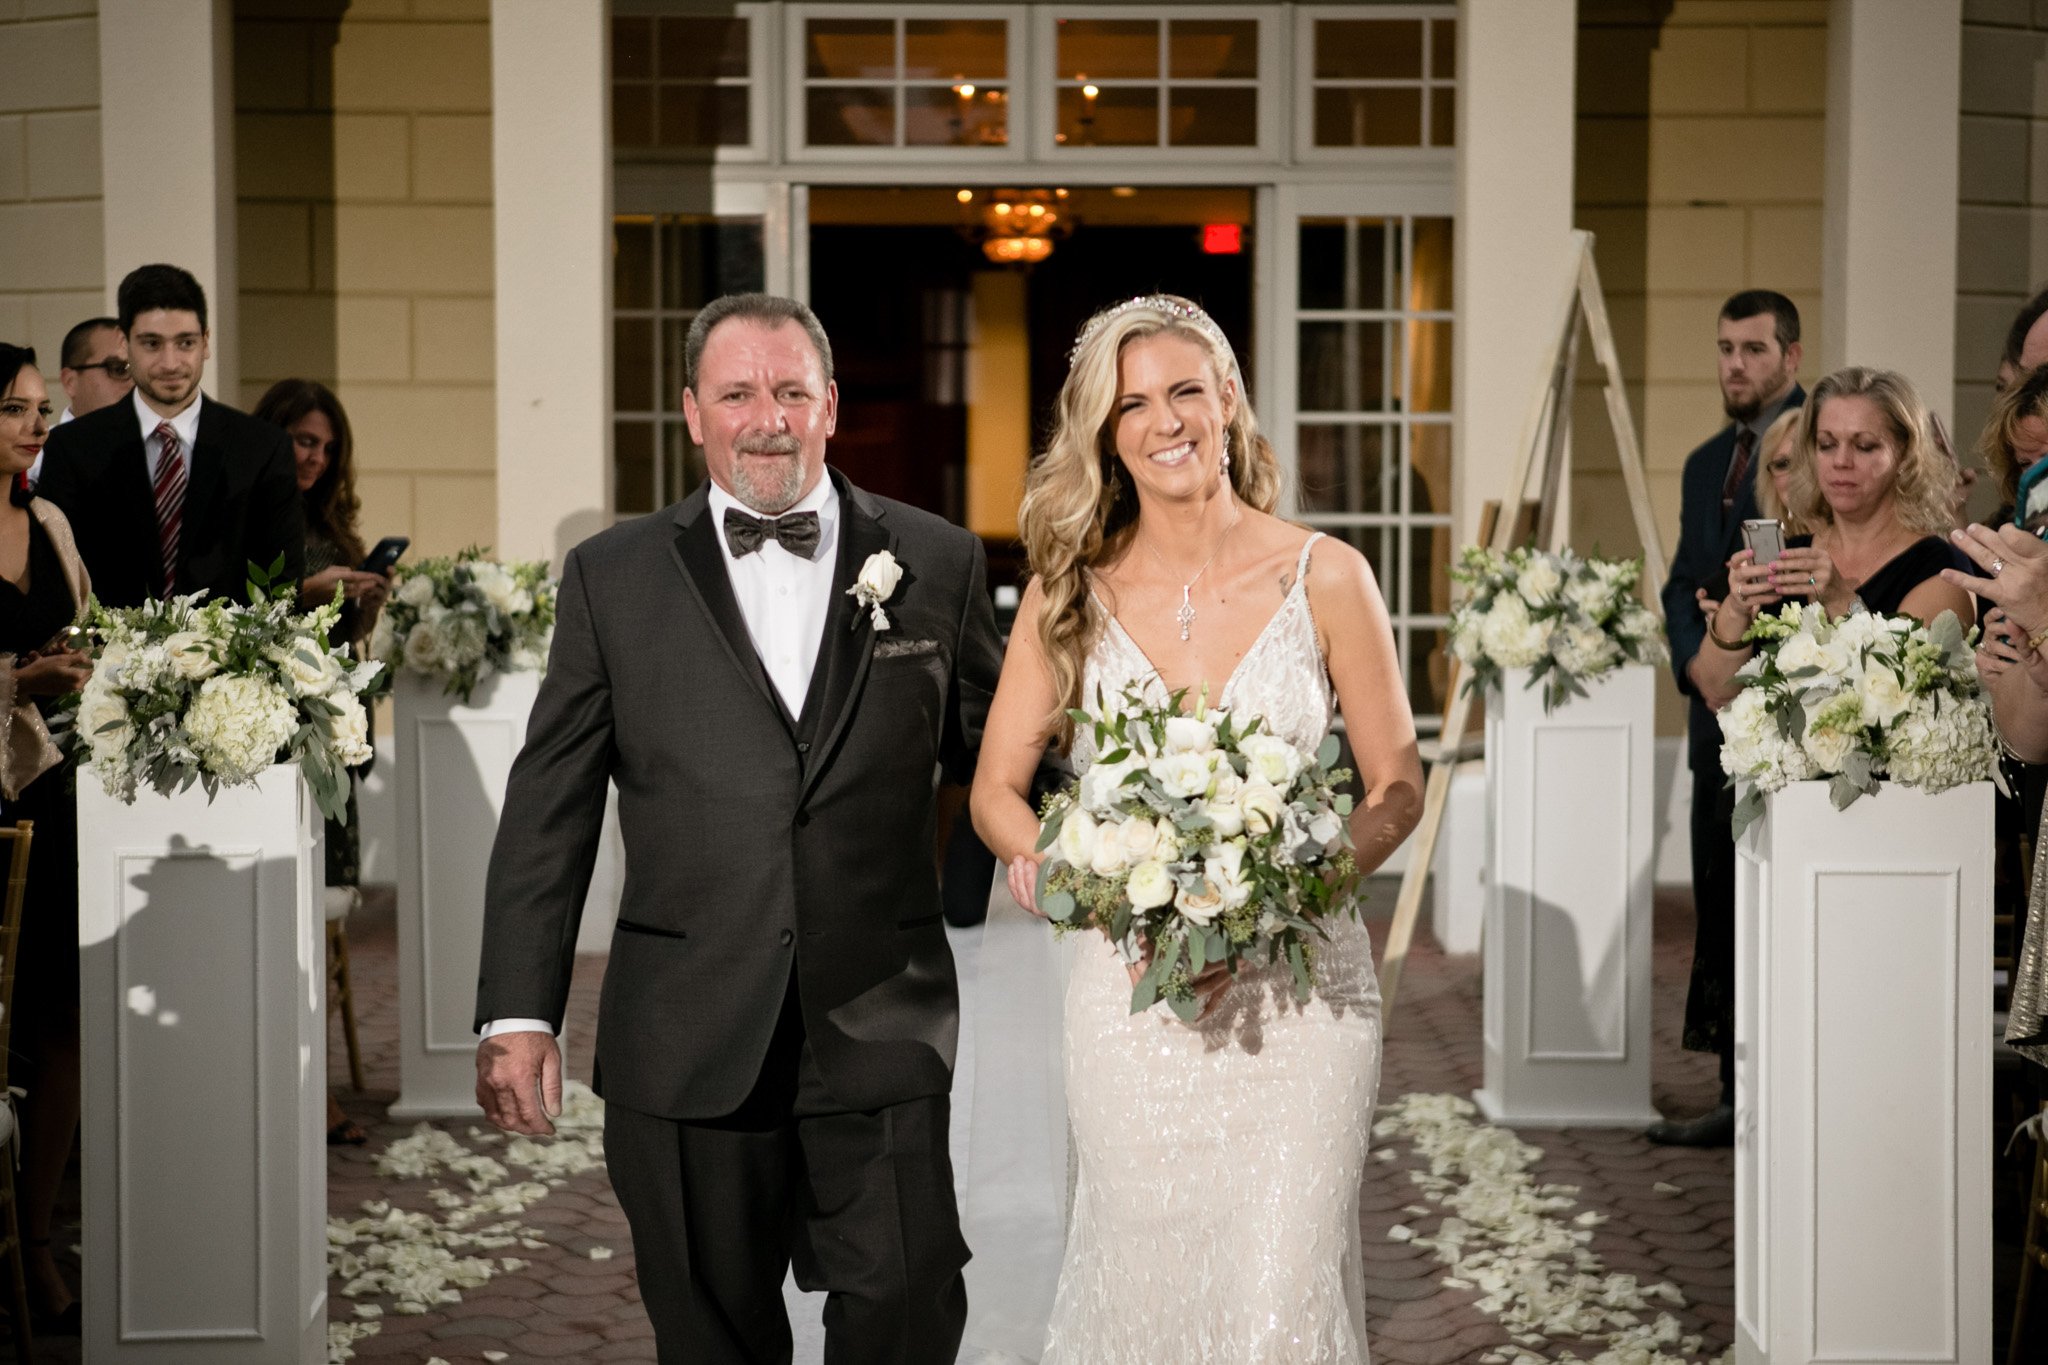 Bride walking down the aisle - Mansion at Oyster Bay Image